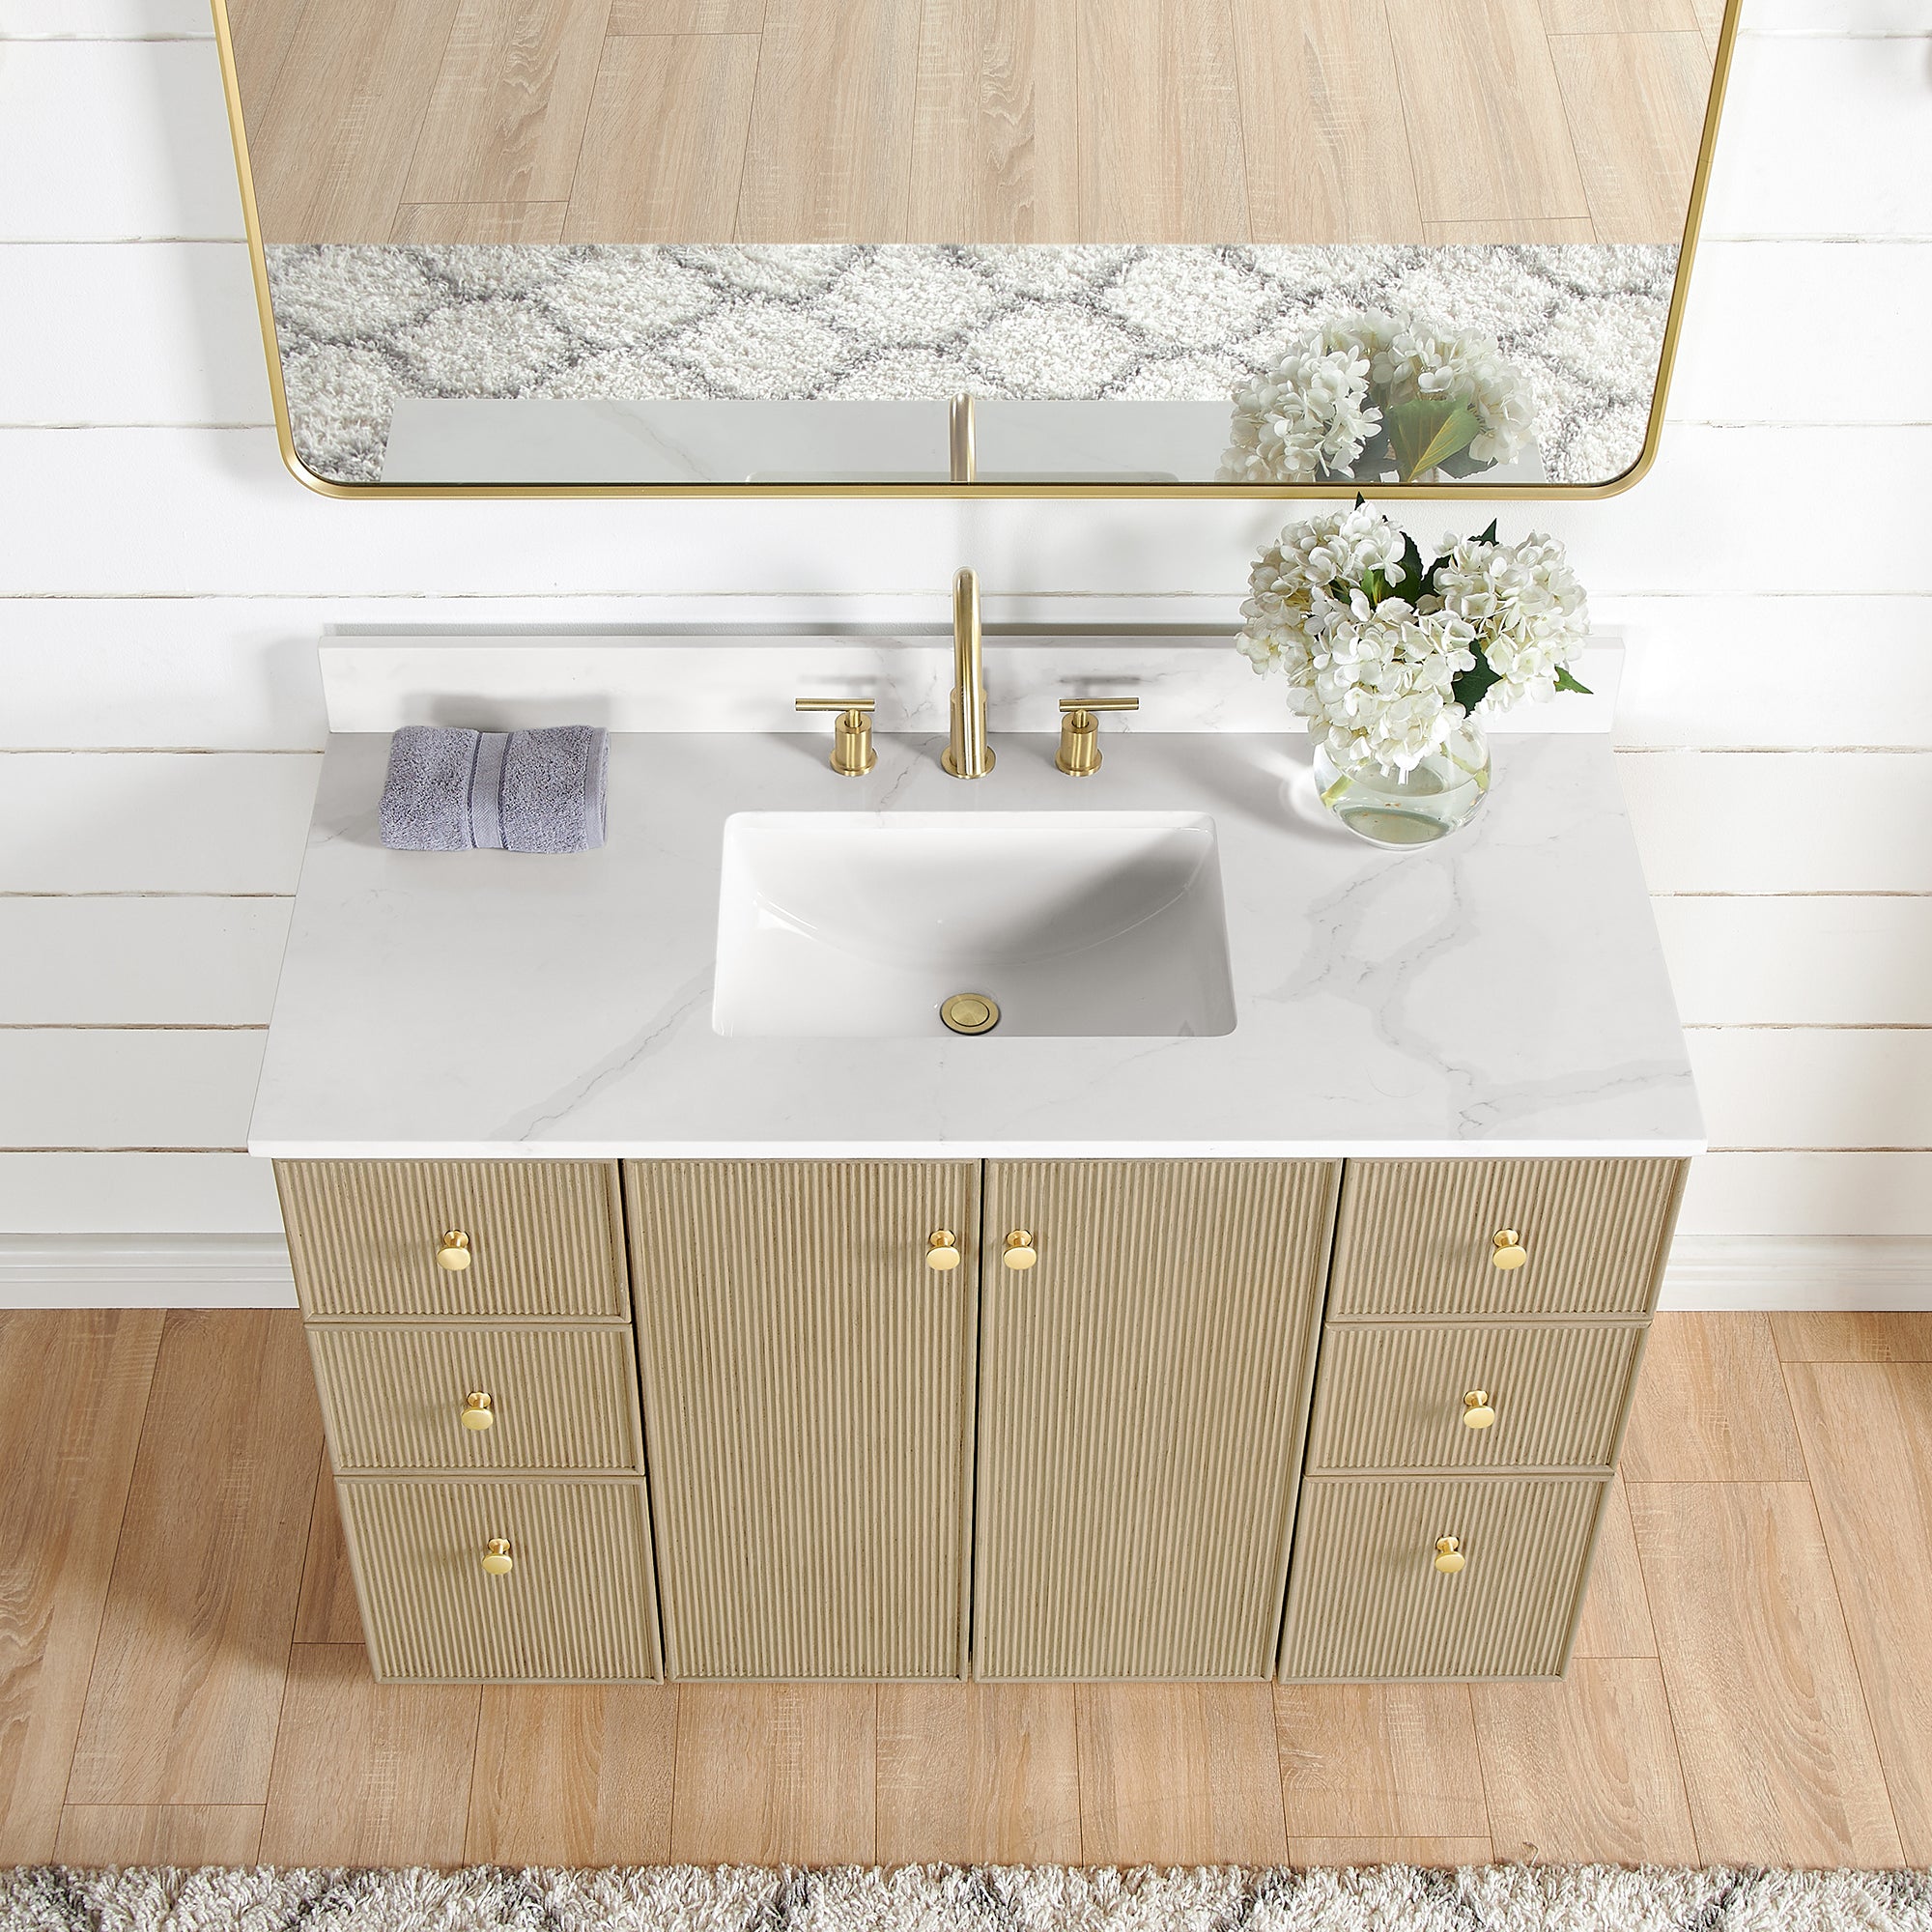 Oza 48" Free-standing Single Bath Vanity in Aged Natural Oak with Fish Maw White Quartz Stone Top